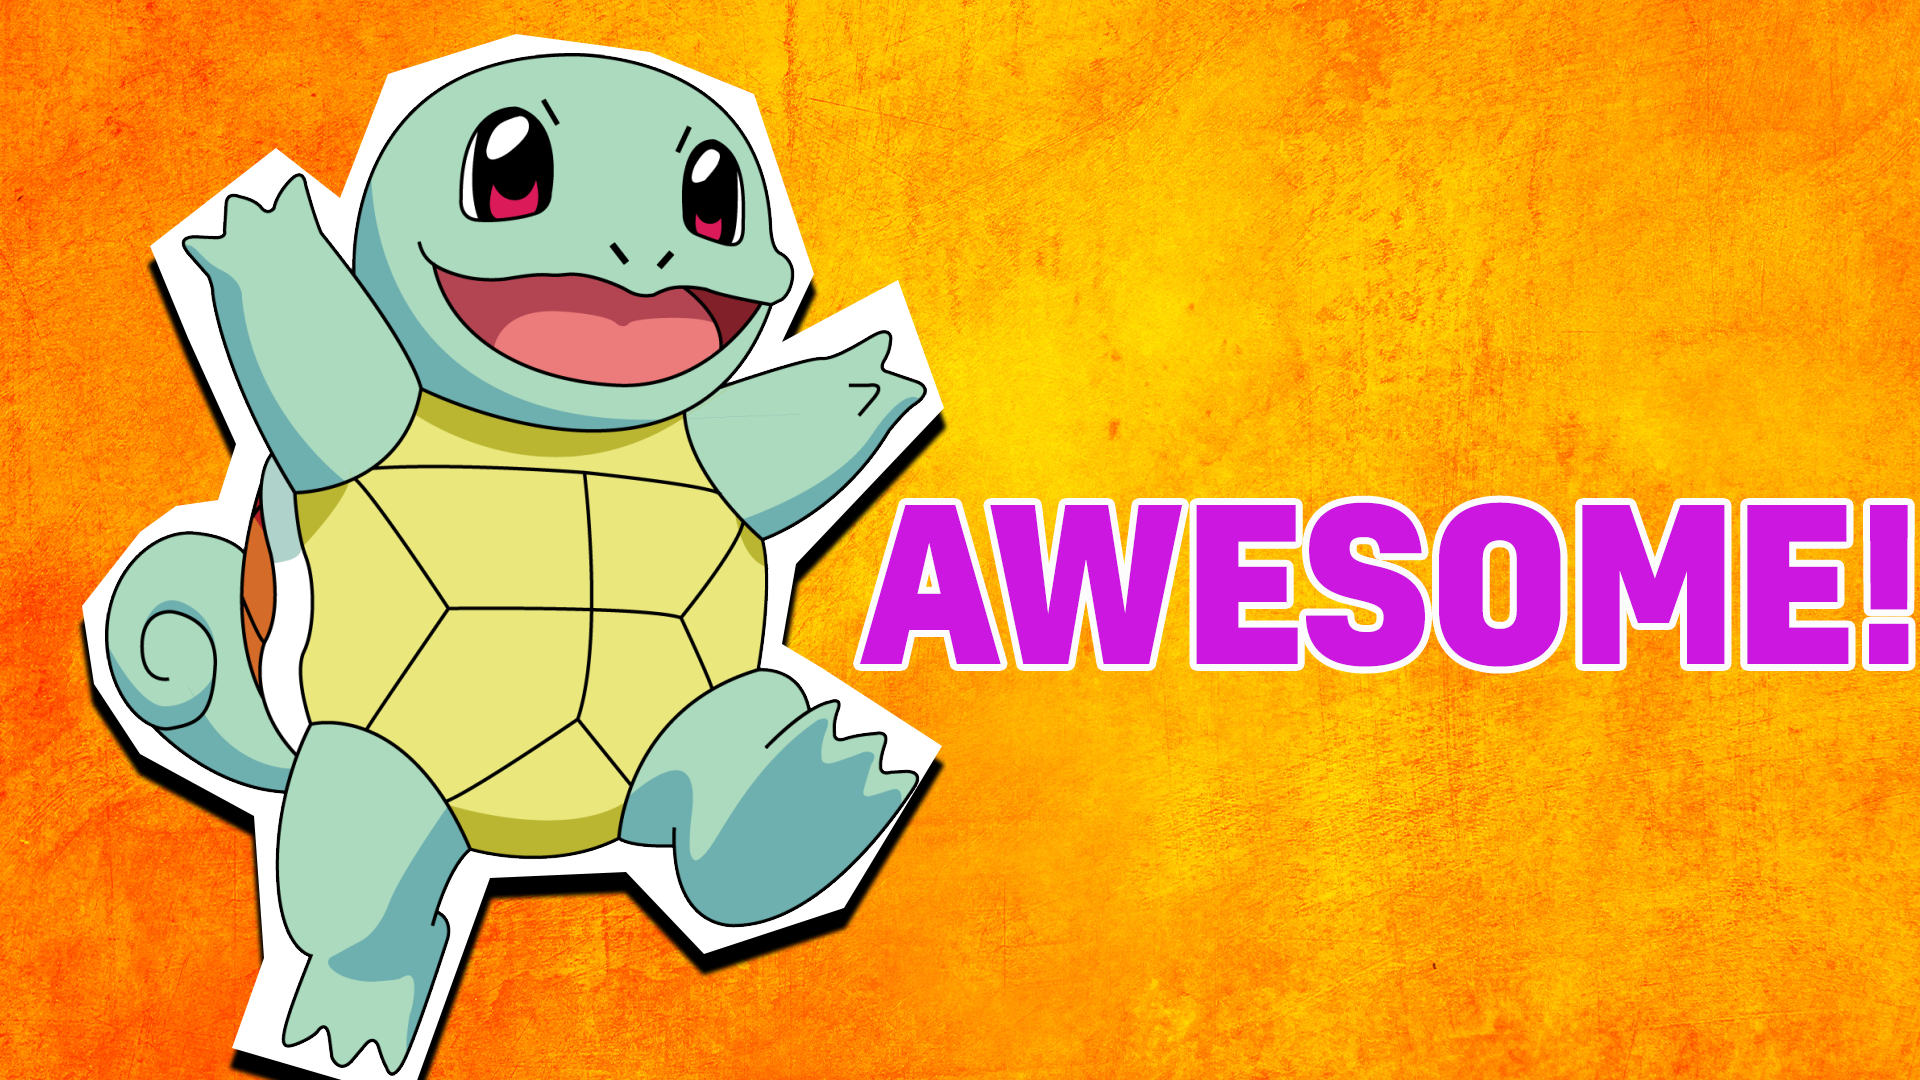 Incredible! You caught every single answer and that makes you a Pokémon quiz master!